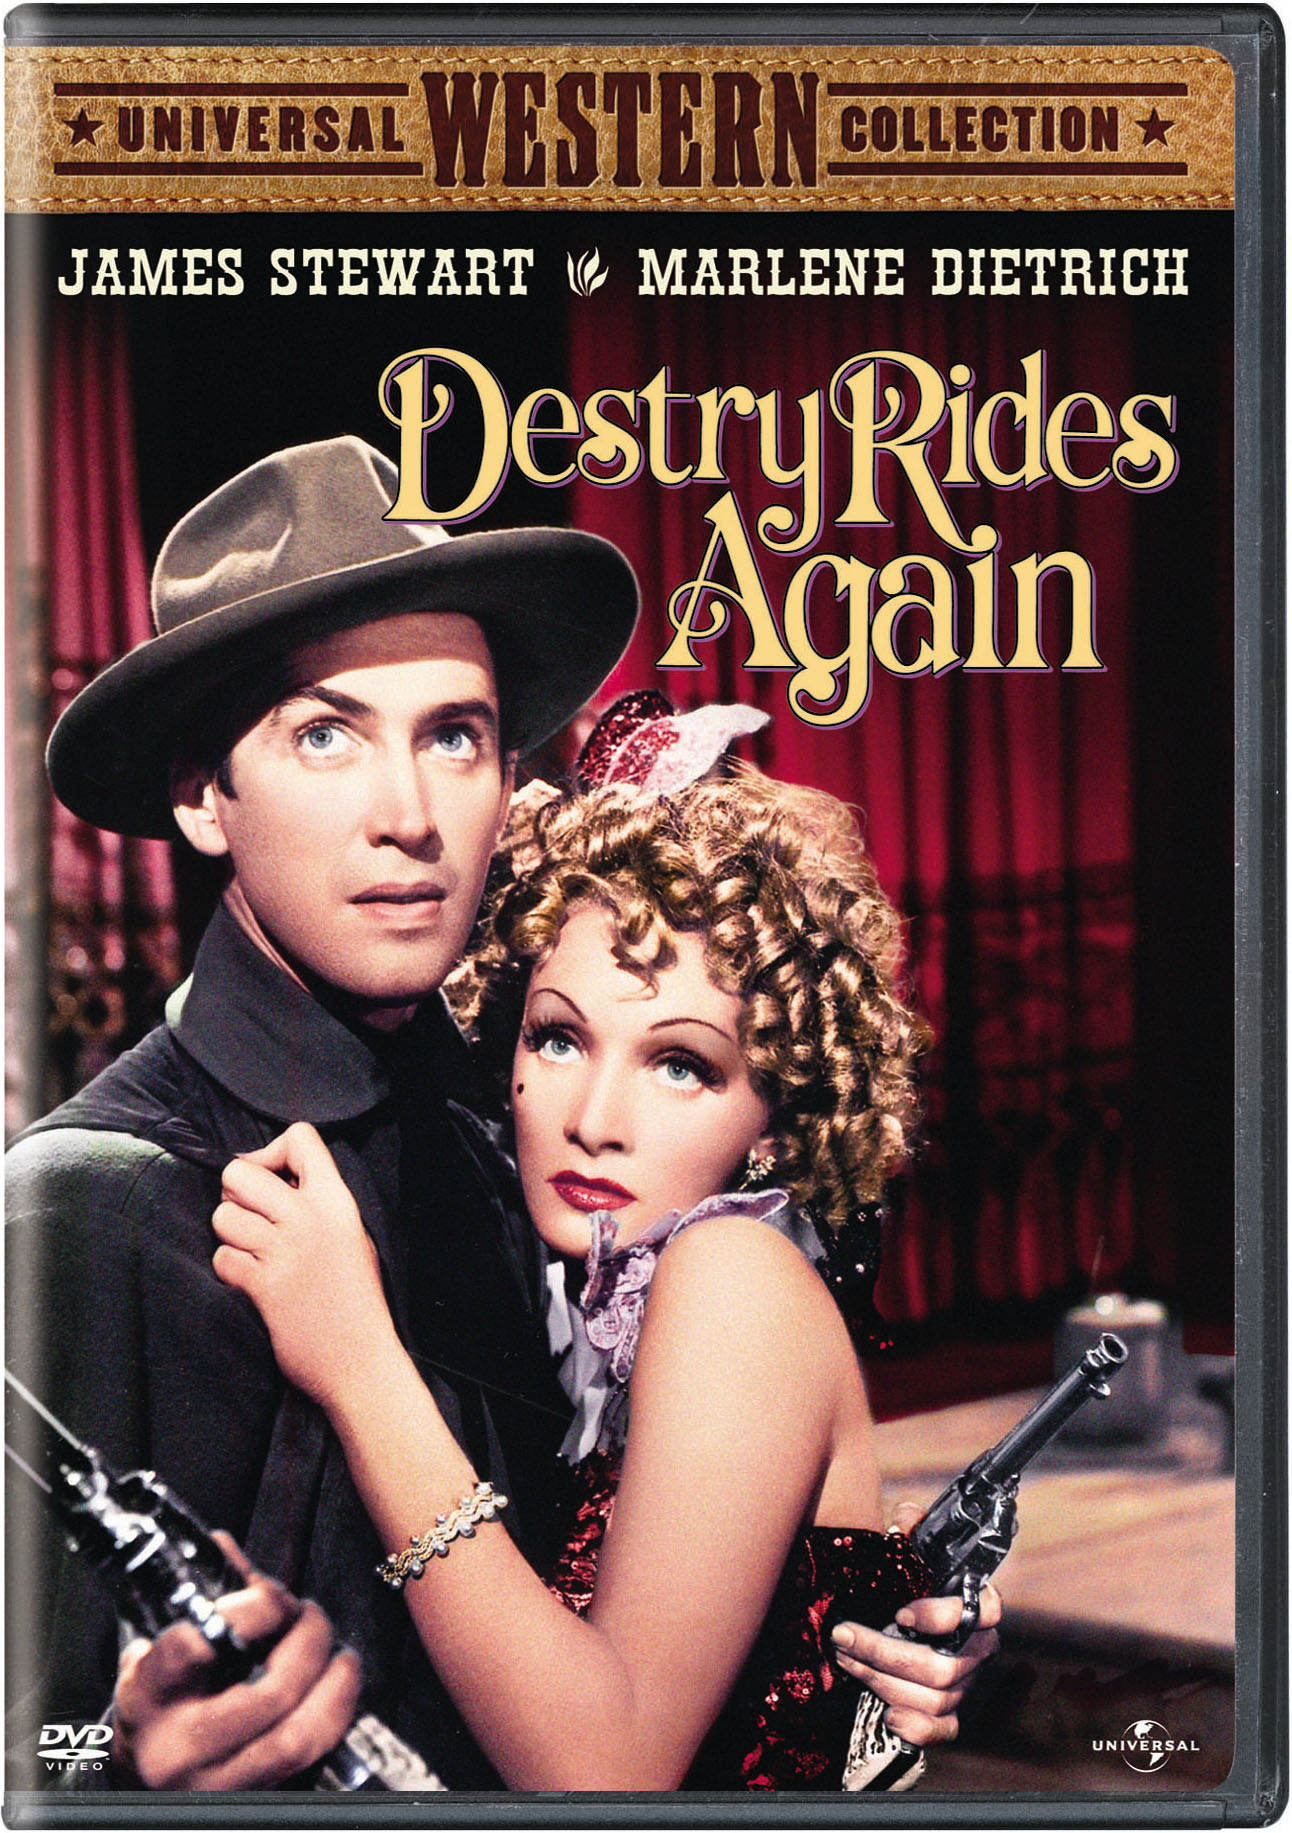 Destry Rides Again - DVD [ 1939 ]  - Western Movies On DVD - Movies On GRUV